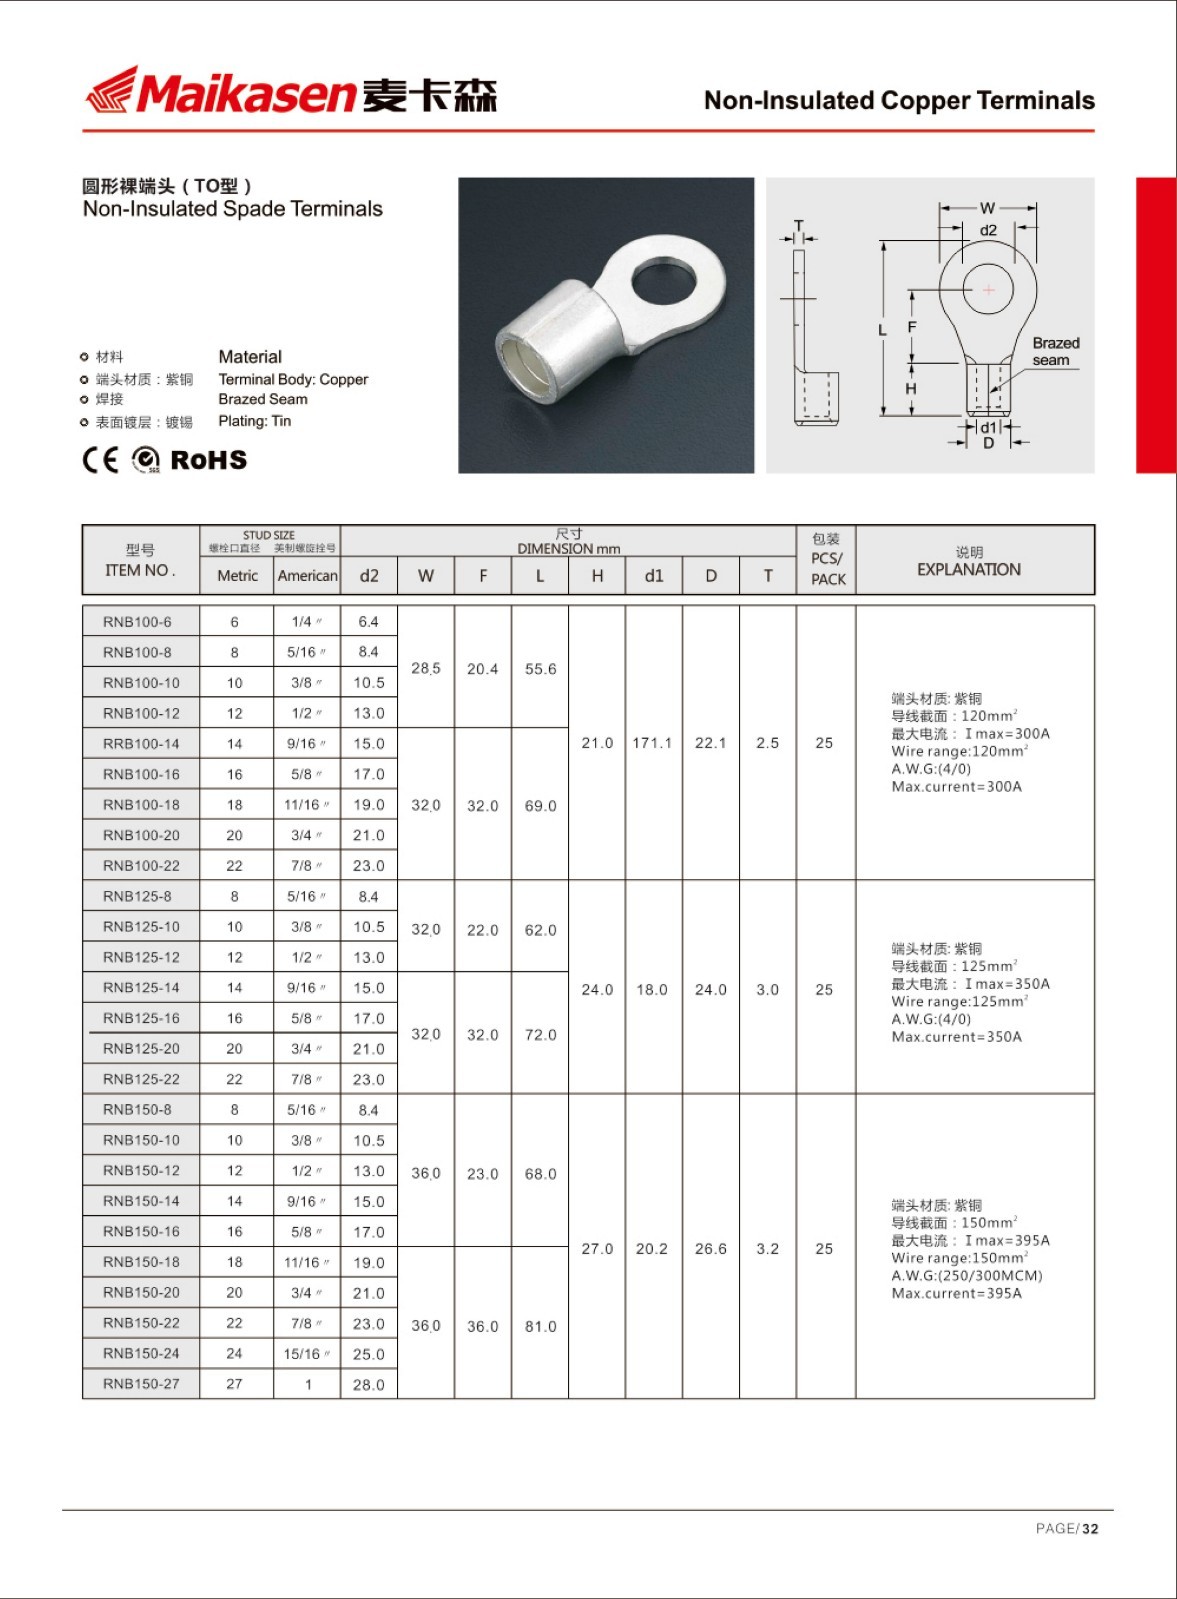 MKS durable electric wire connector factory price for shipping